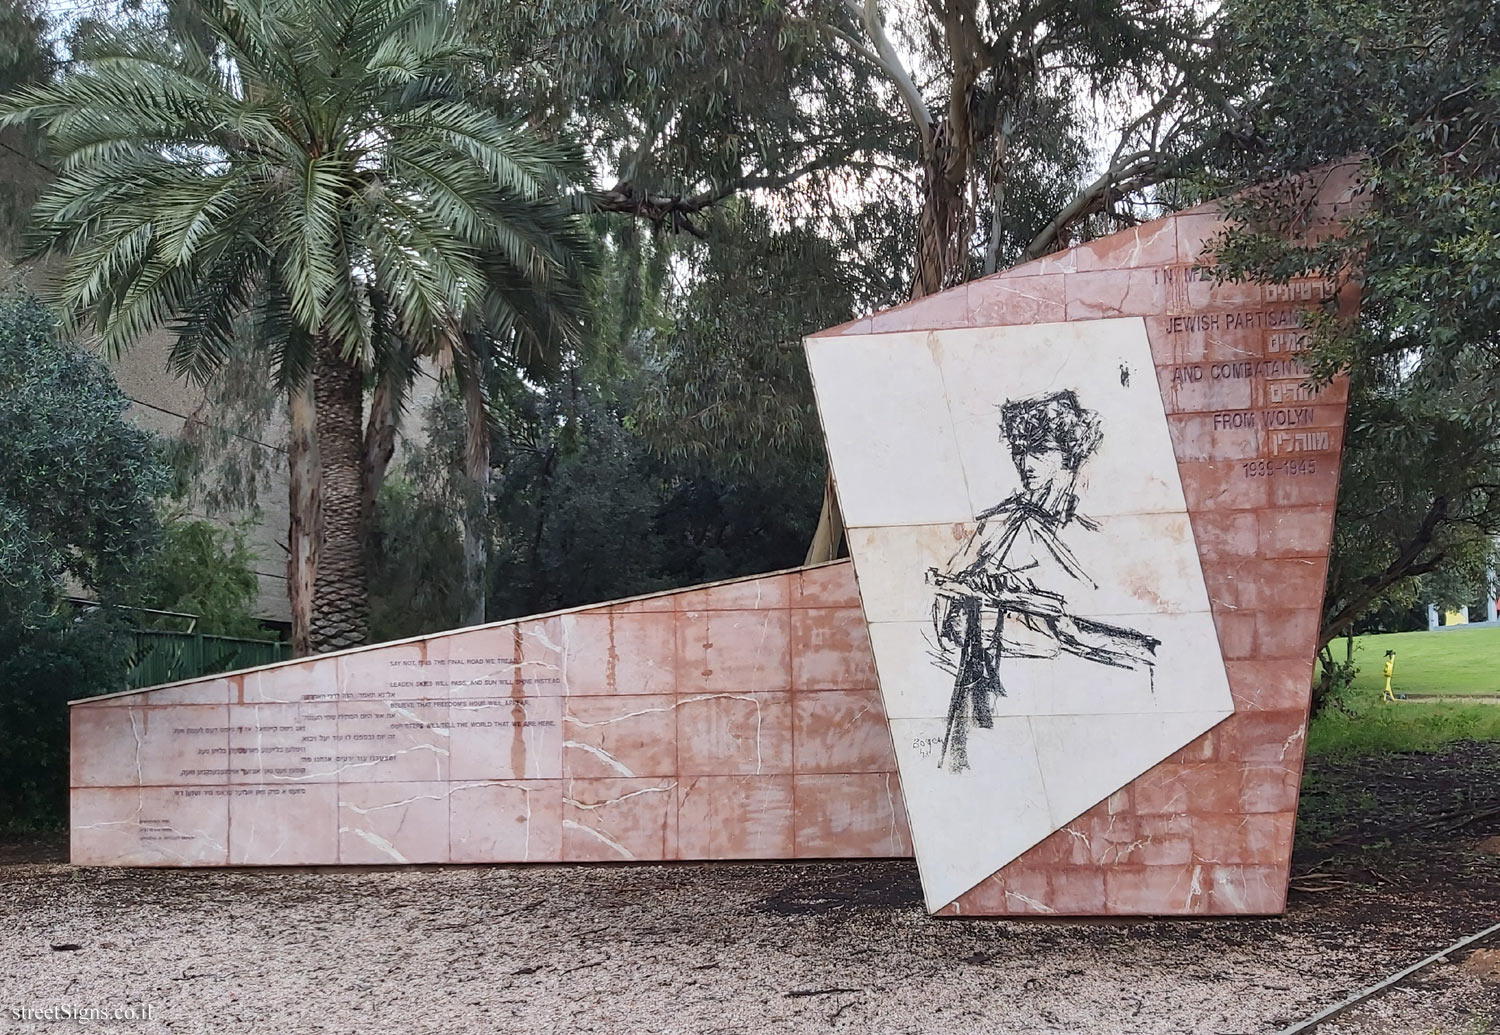 Givatayim - A monument in memory of the Jewish partisans and Jewish fighters from Wolyn